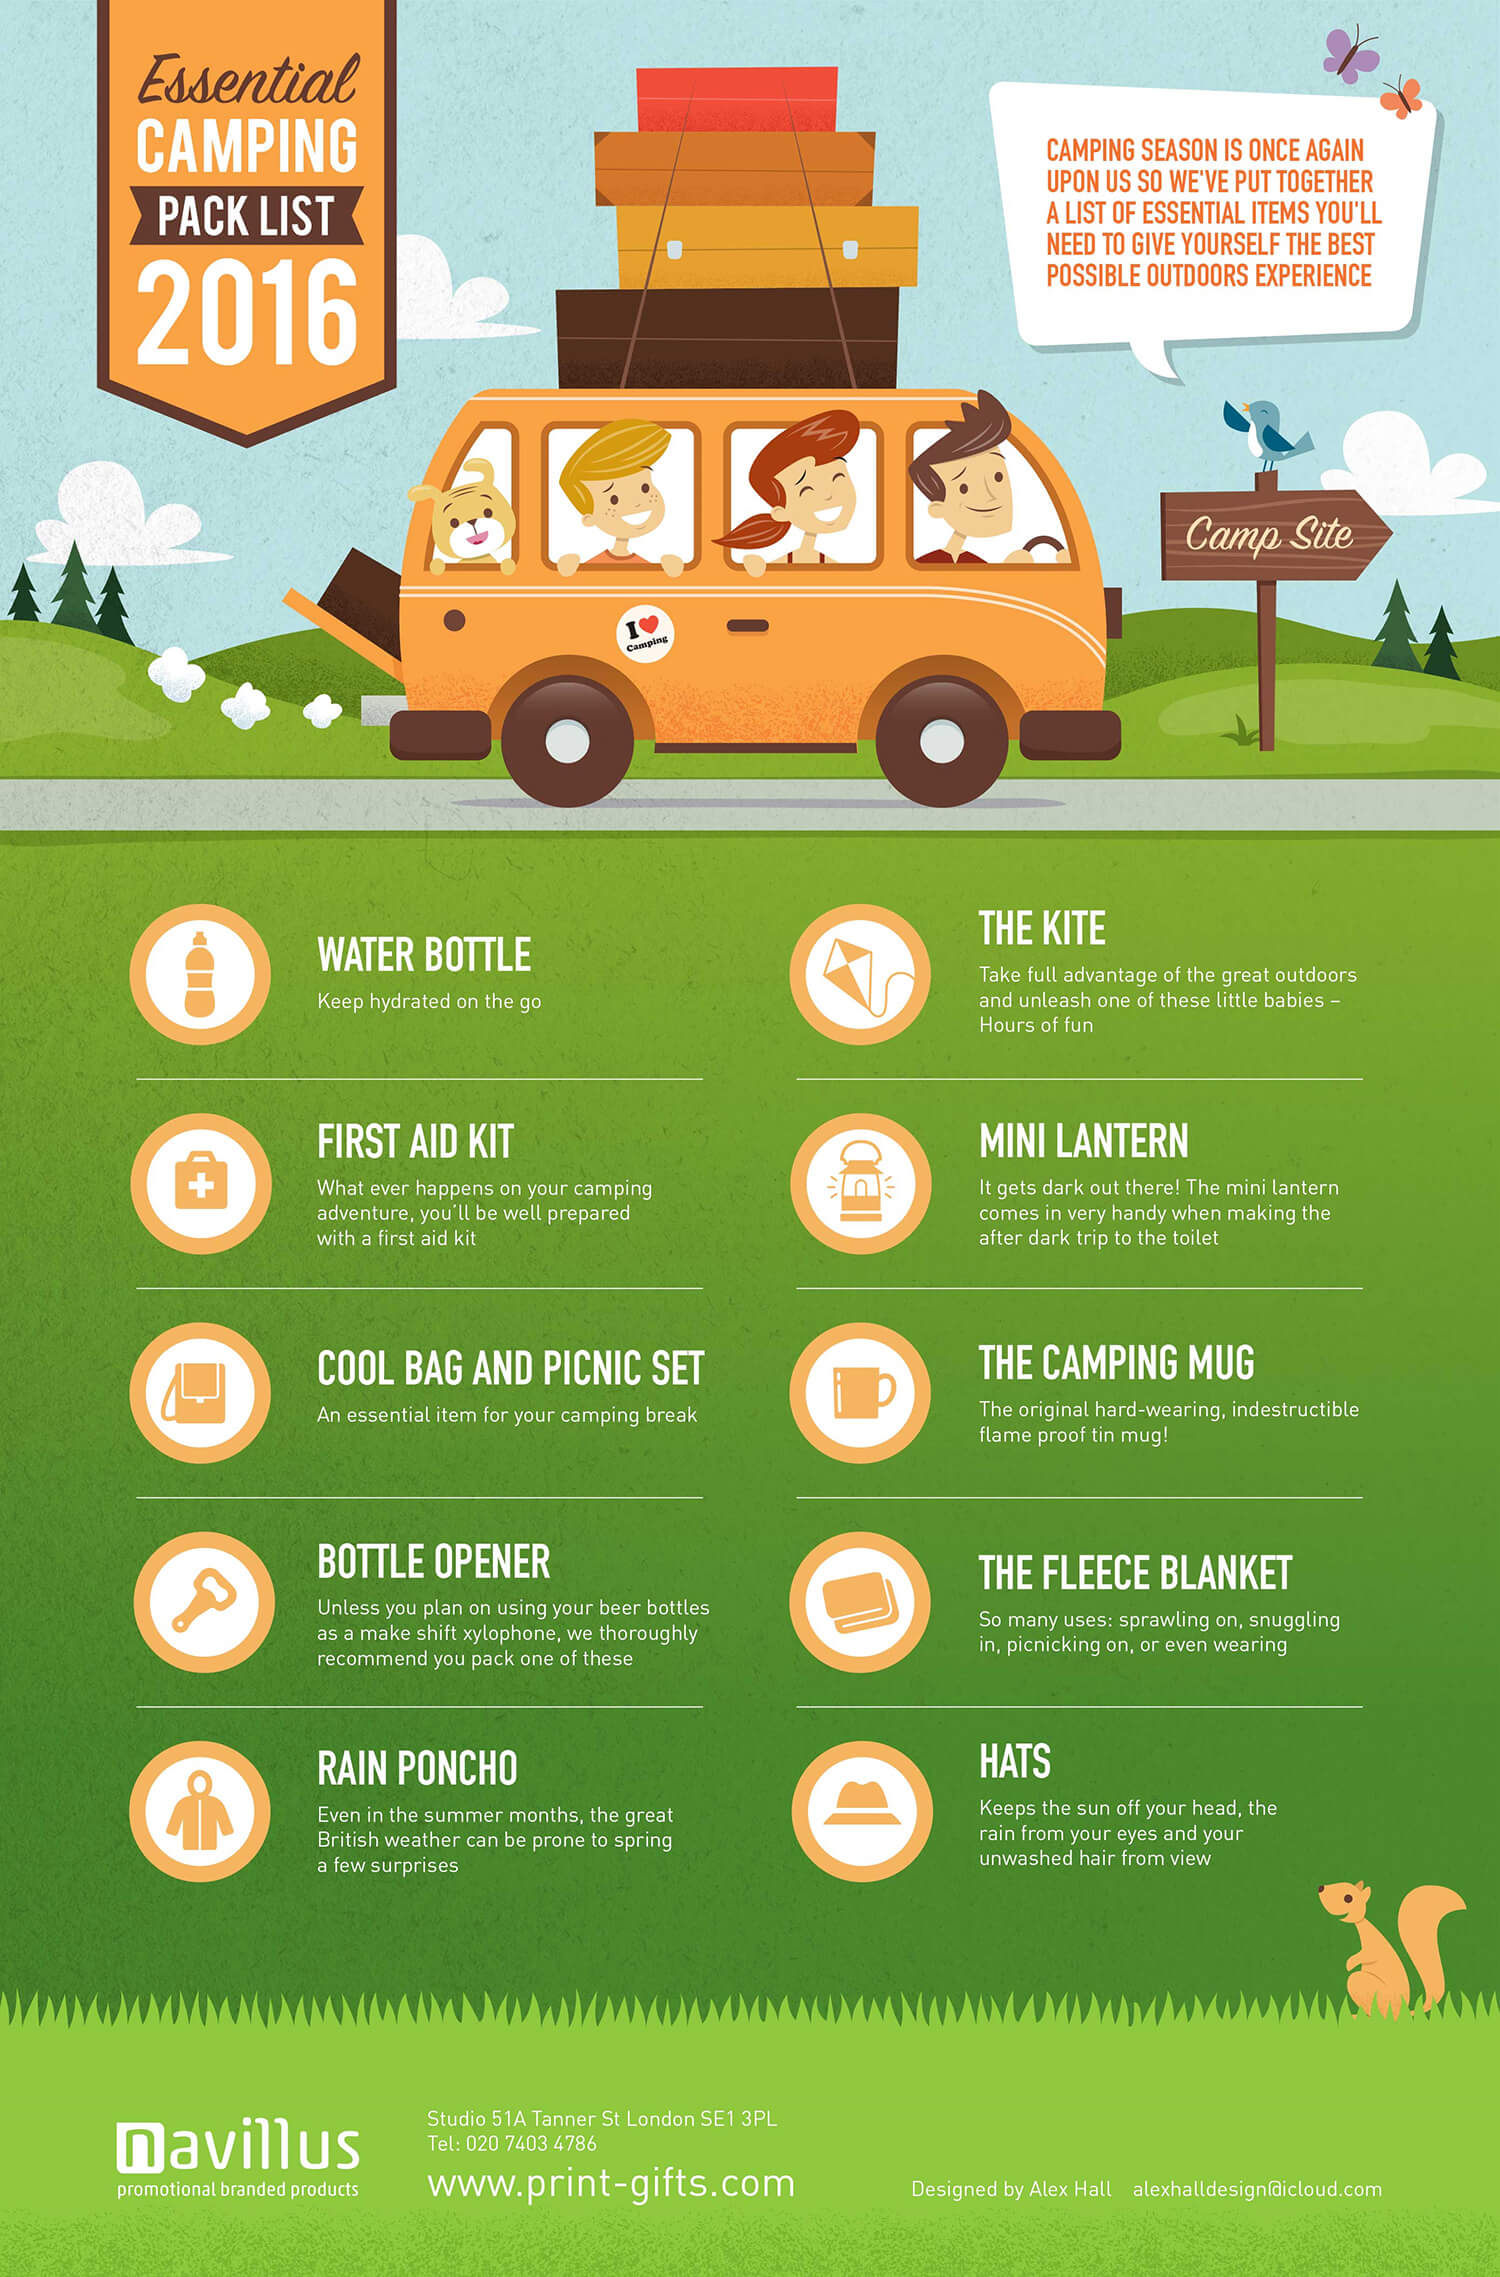 Print Gifts Essential Camping Packing List